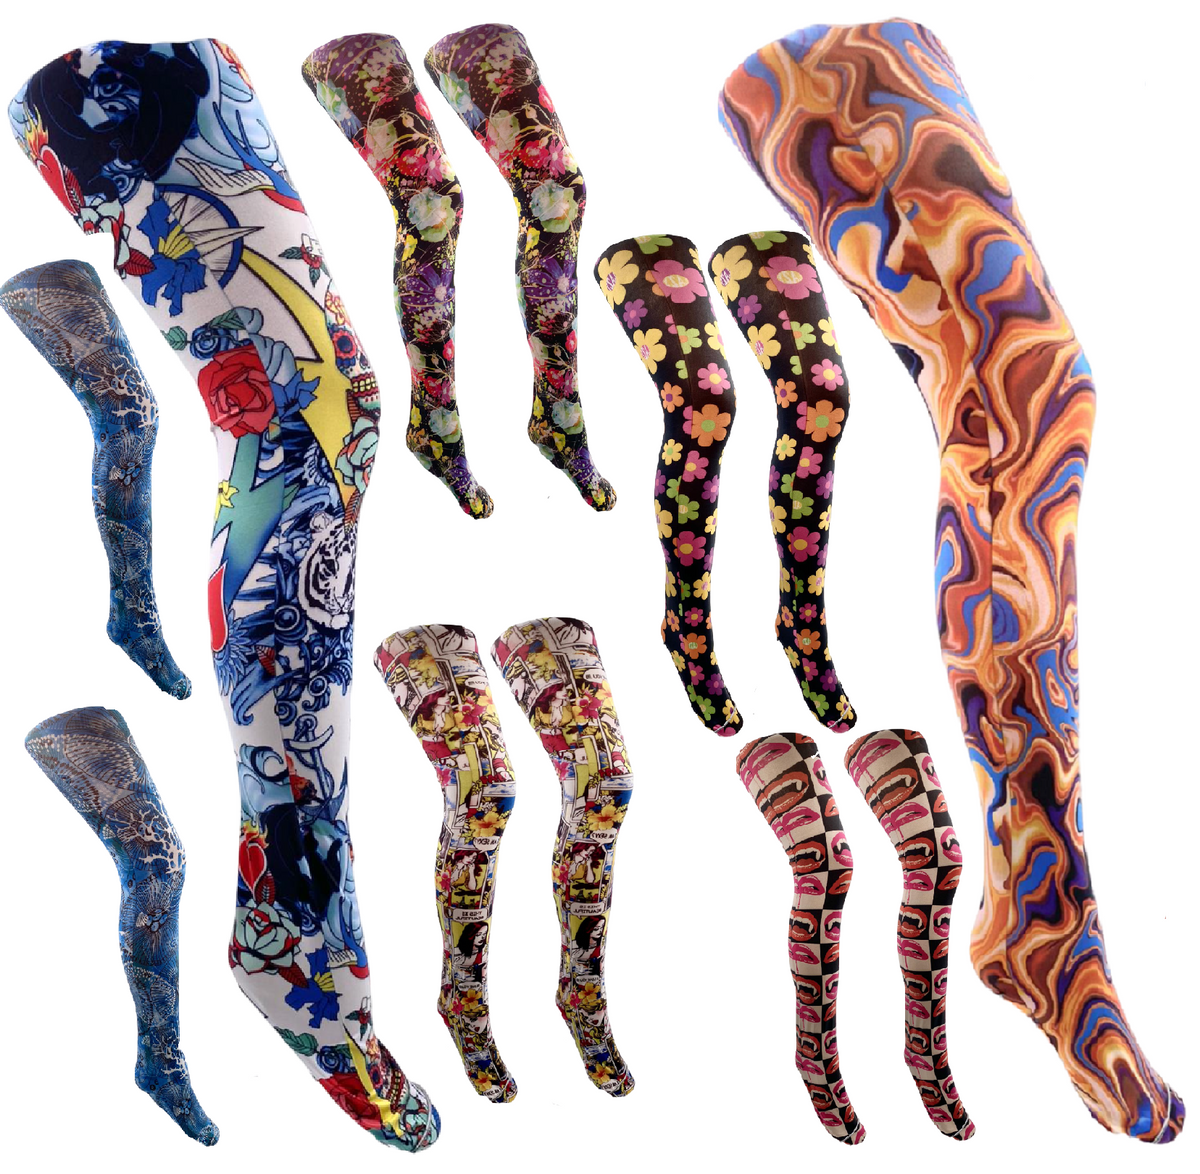 PATTERNED PRINTED TIGHTS Festival 60's 70's 90's Bright Vintage Pop Art  Comic £11.99 - PicClick UK